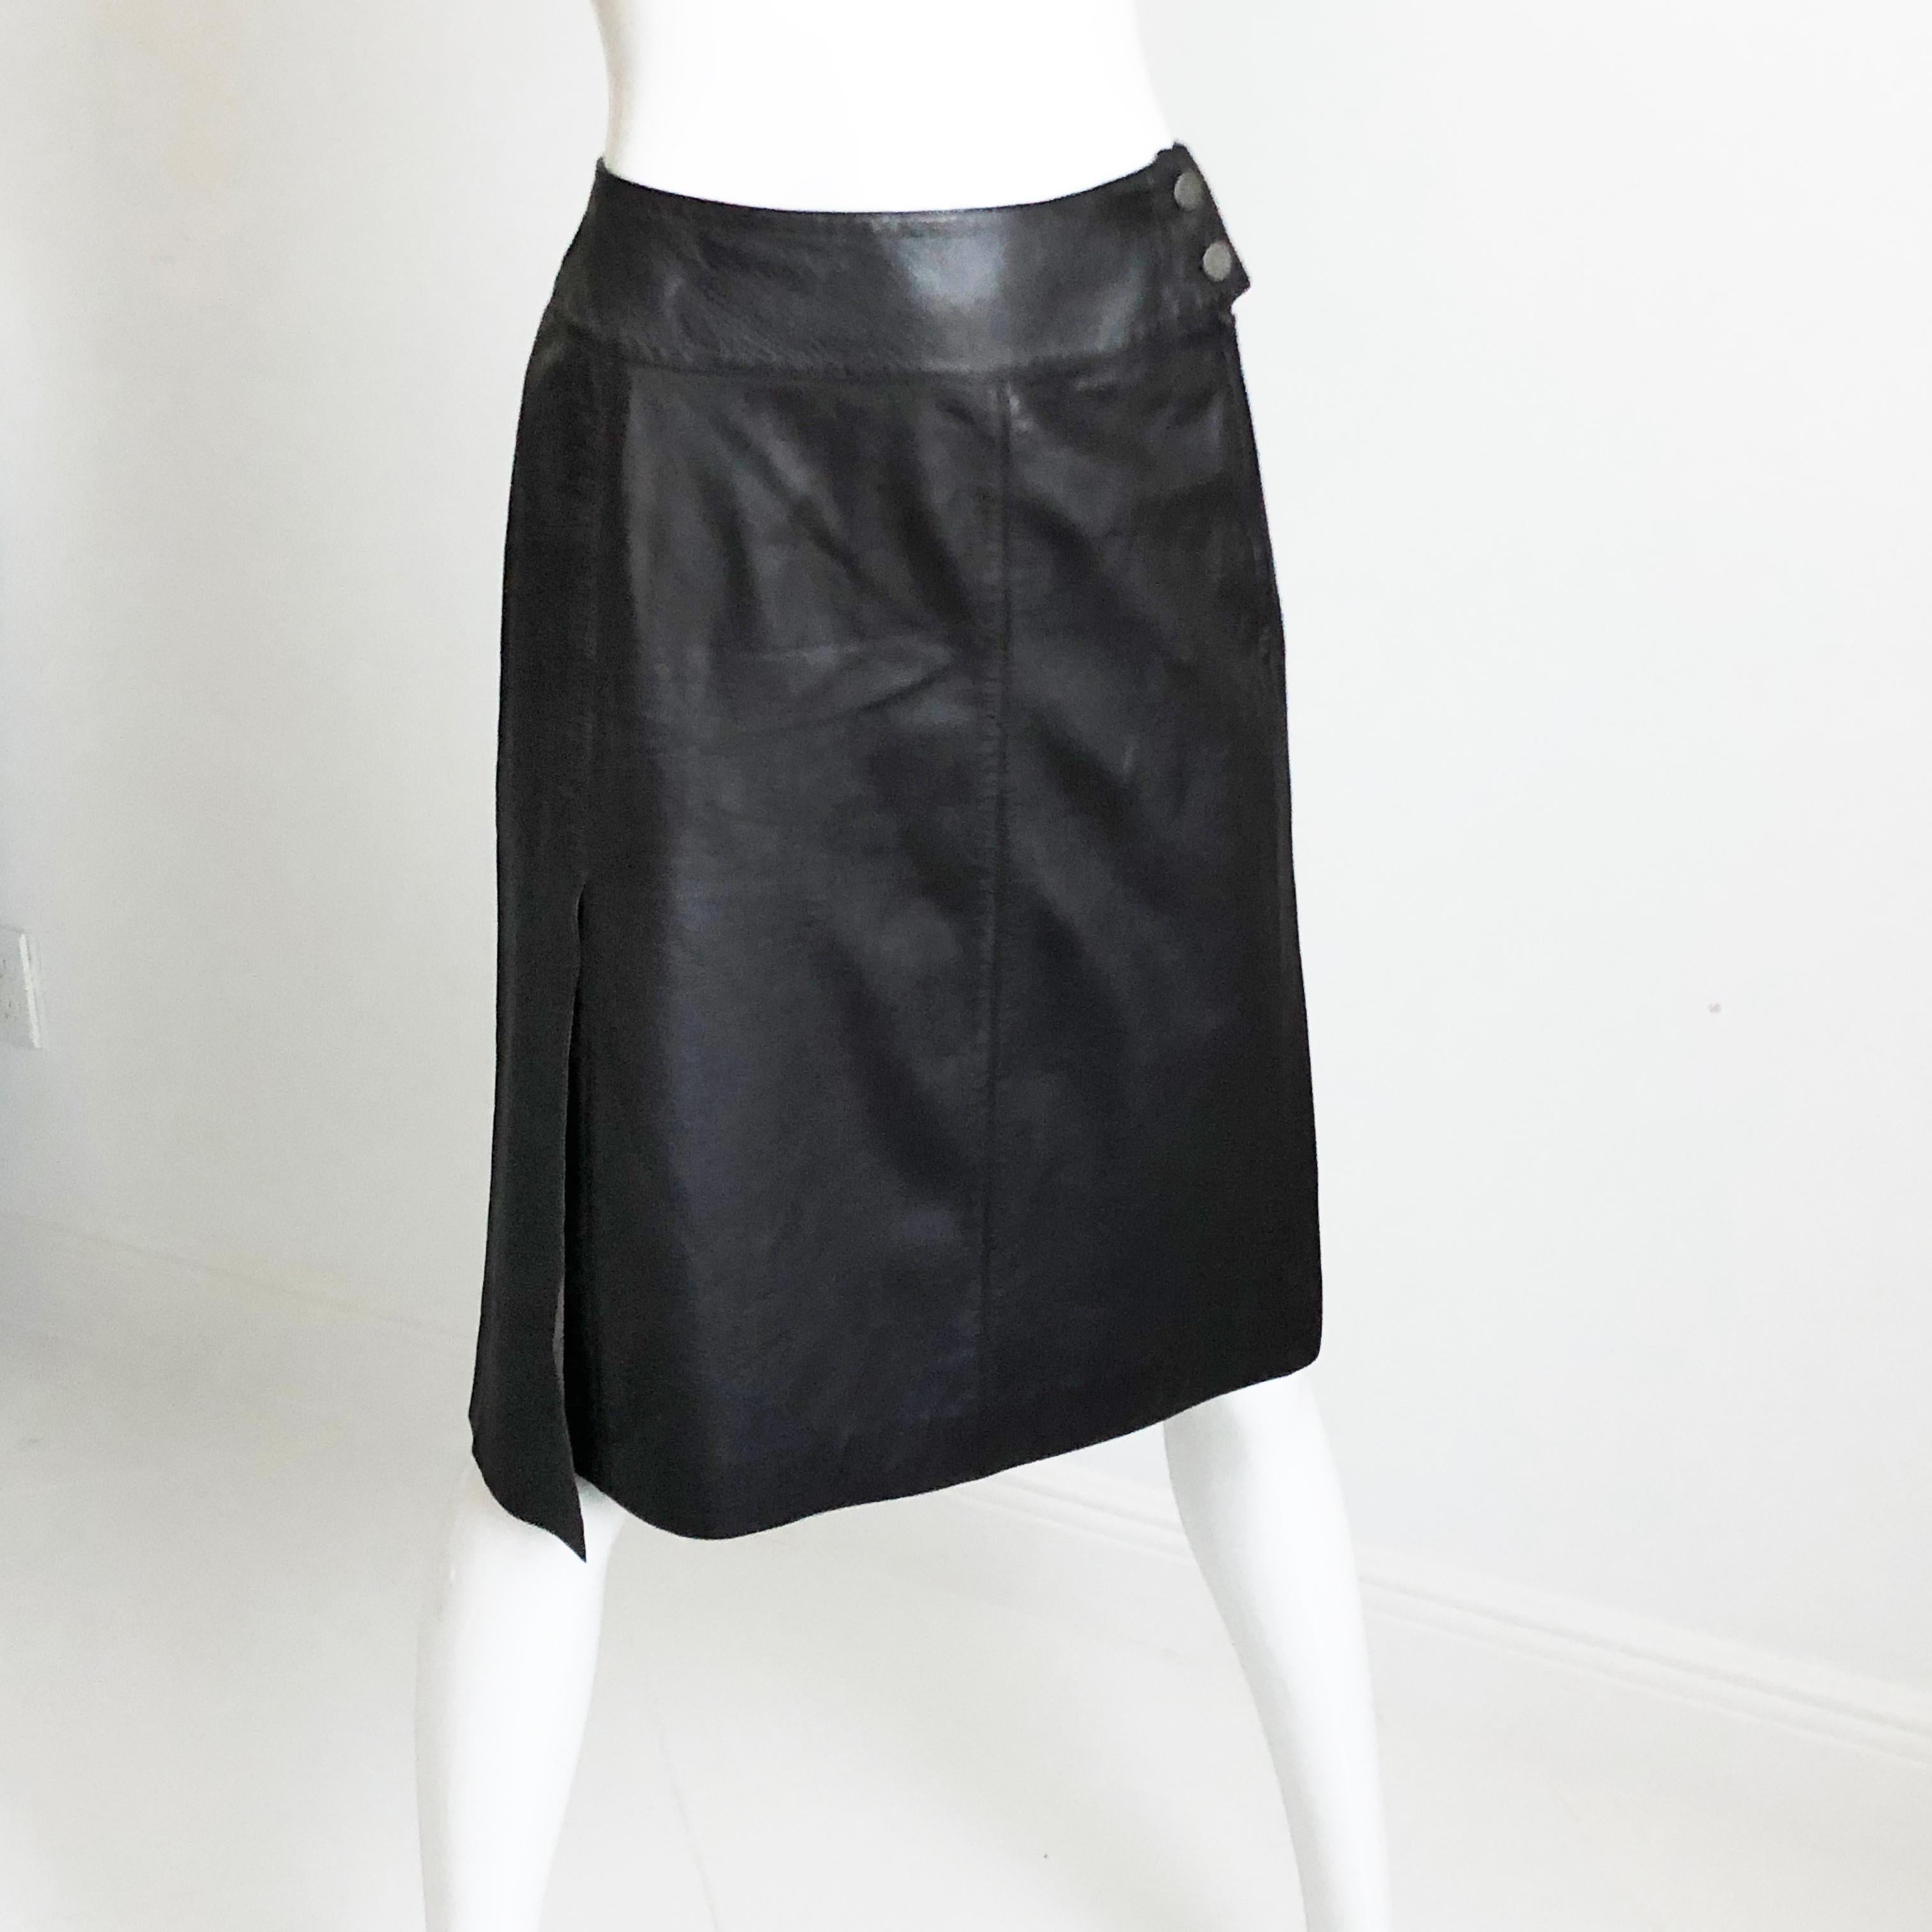 Chanel Leather Skirt Asymmetric Panel Lambskin Mocha Brown 99P Sz 36 In Good Condition For Sale In Port Saint Lucie, FL